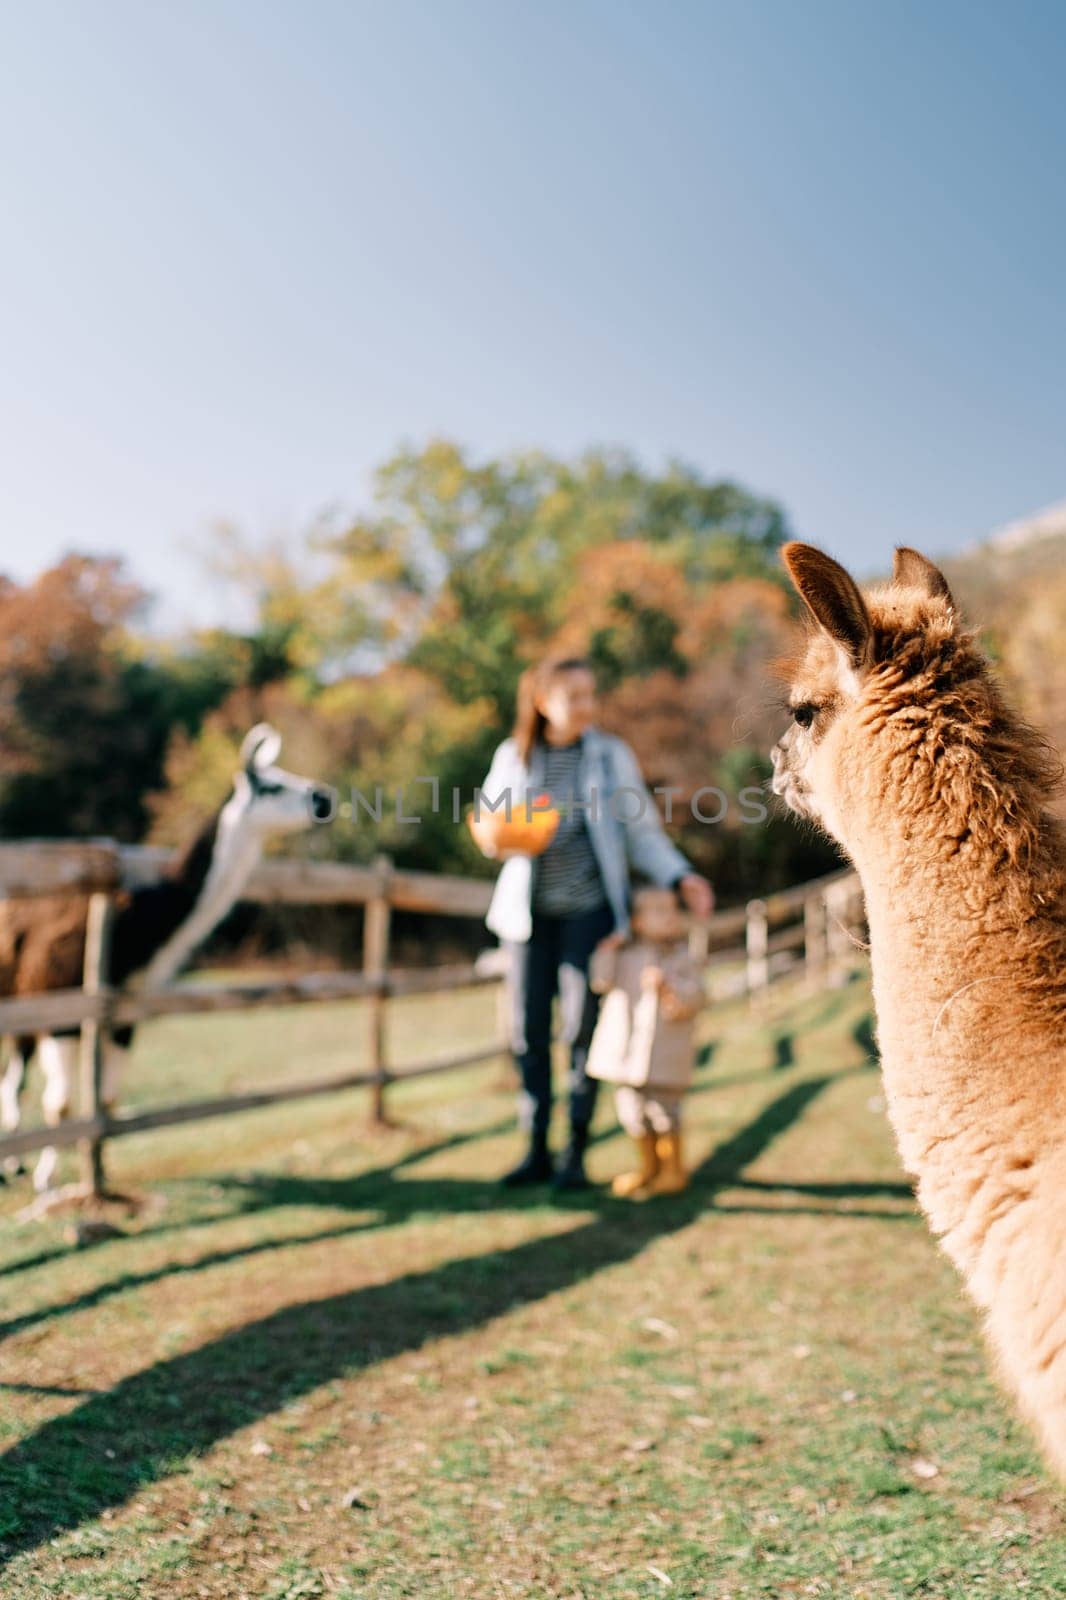 Fluffy llamas look at mom and little girl standing with a bowl of food near them. High quality photo